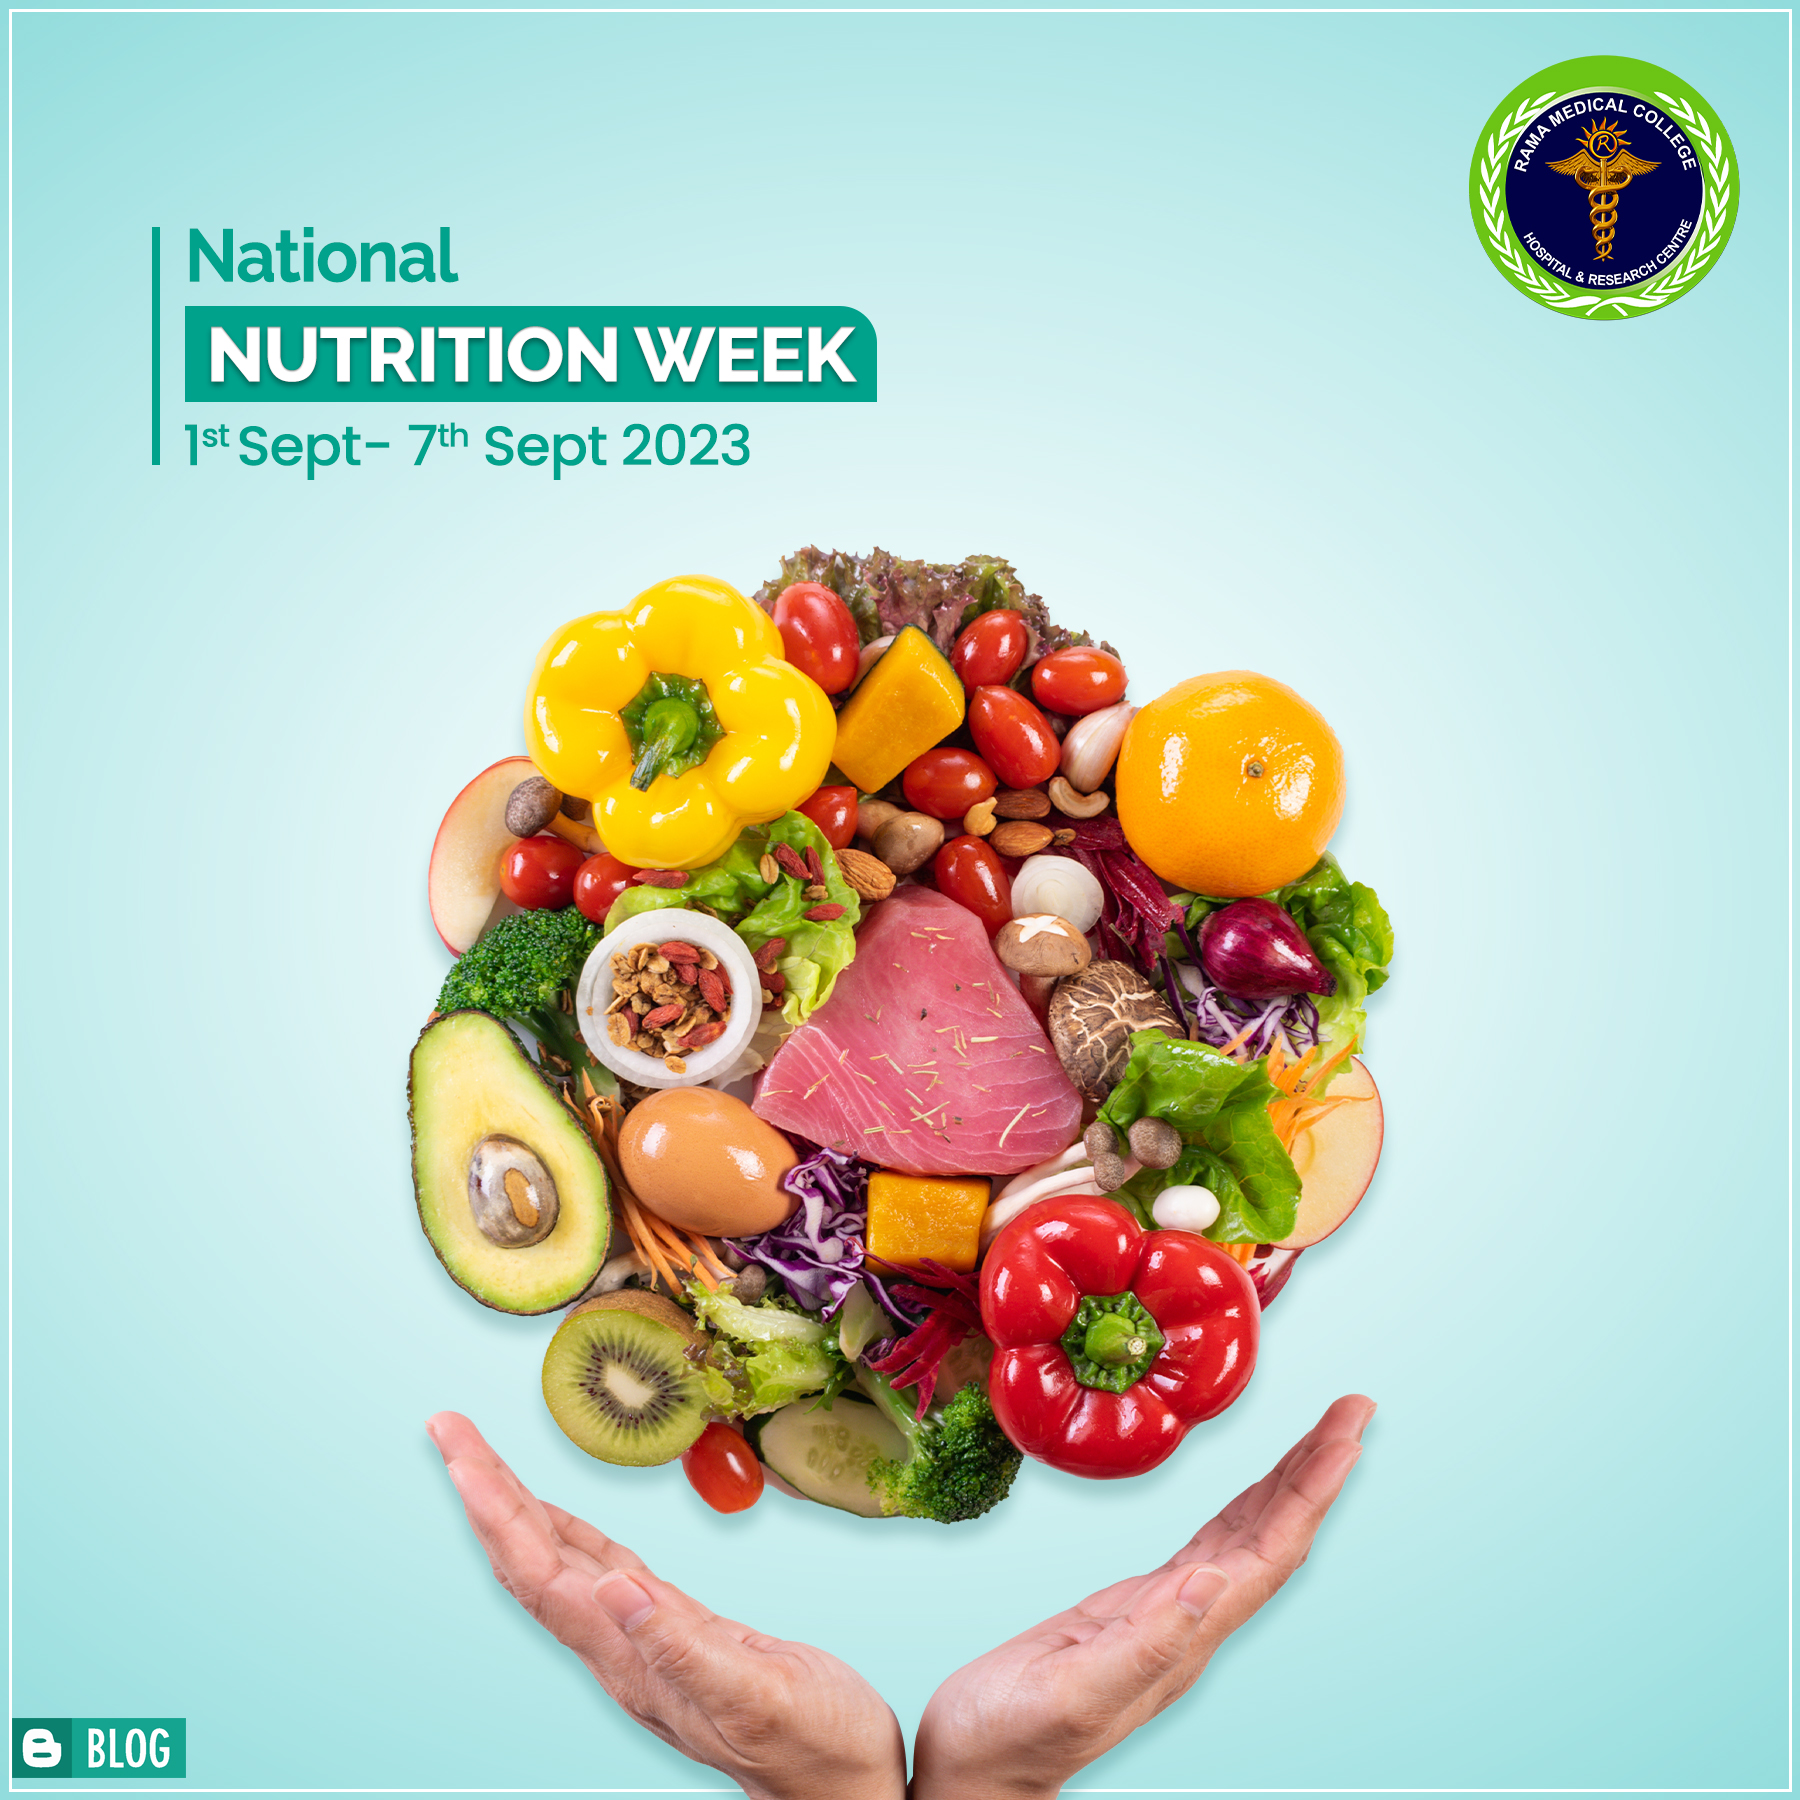 Promoting Health and Wellness: Celebrating National Nutrition Week